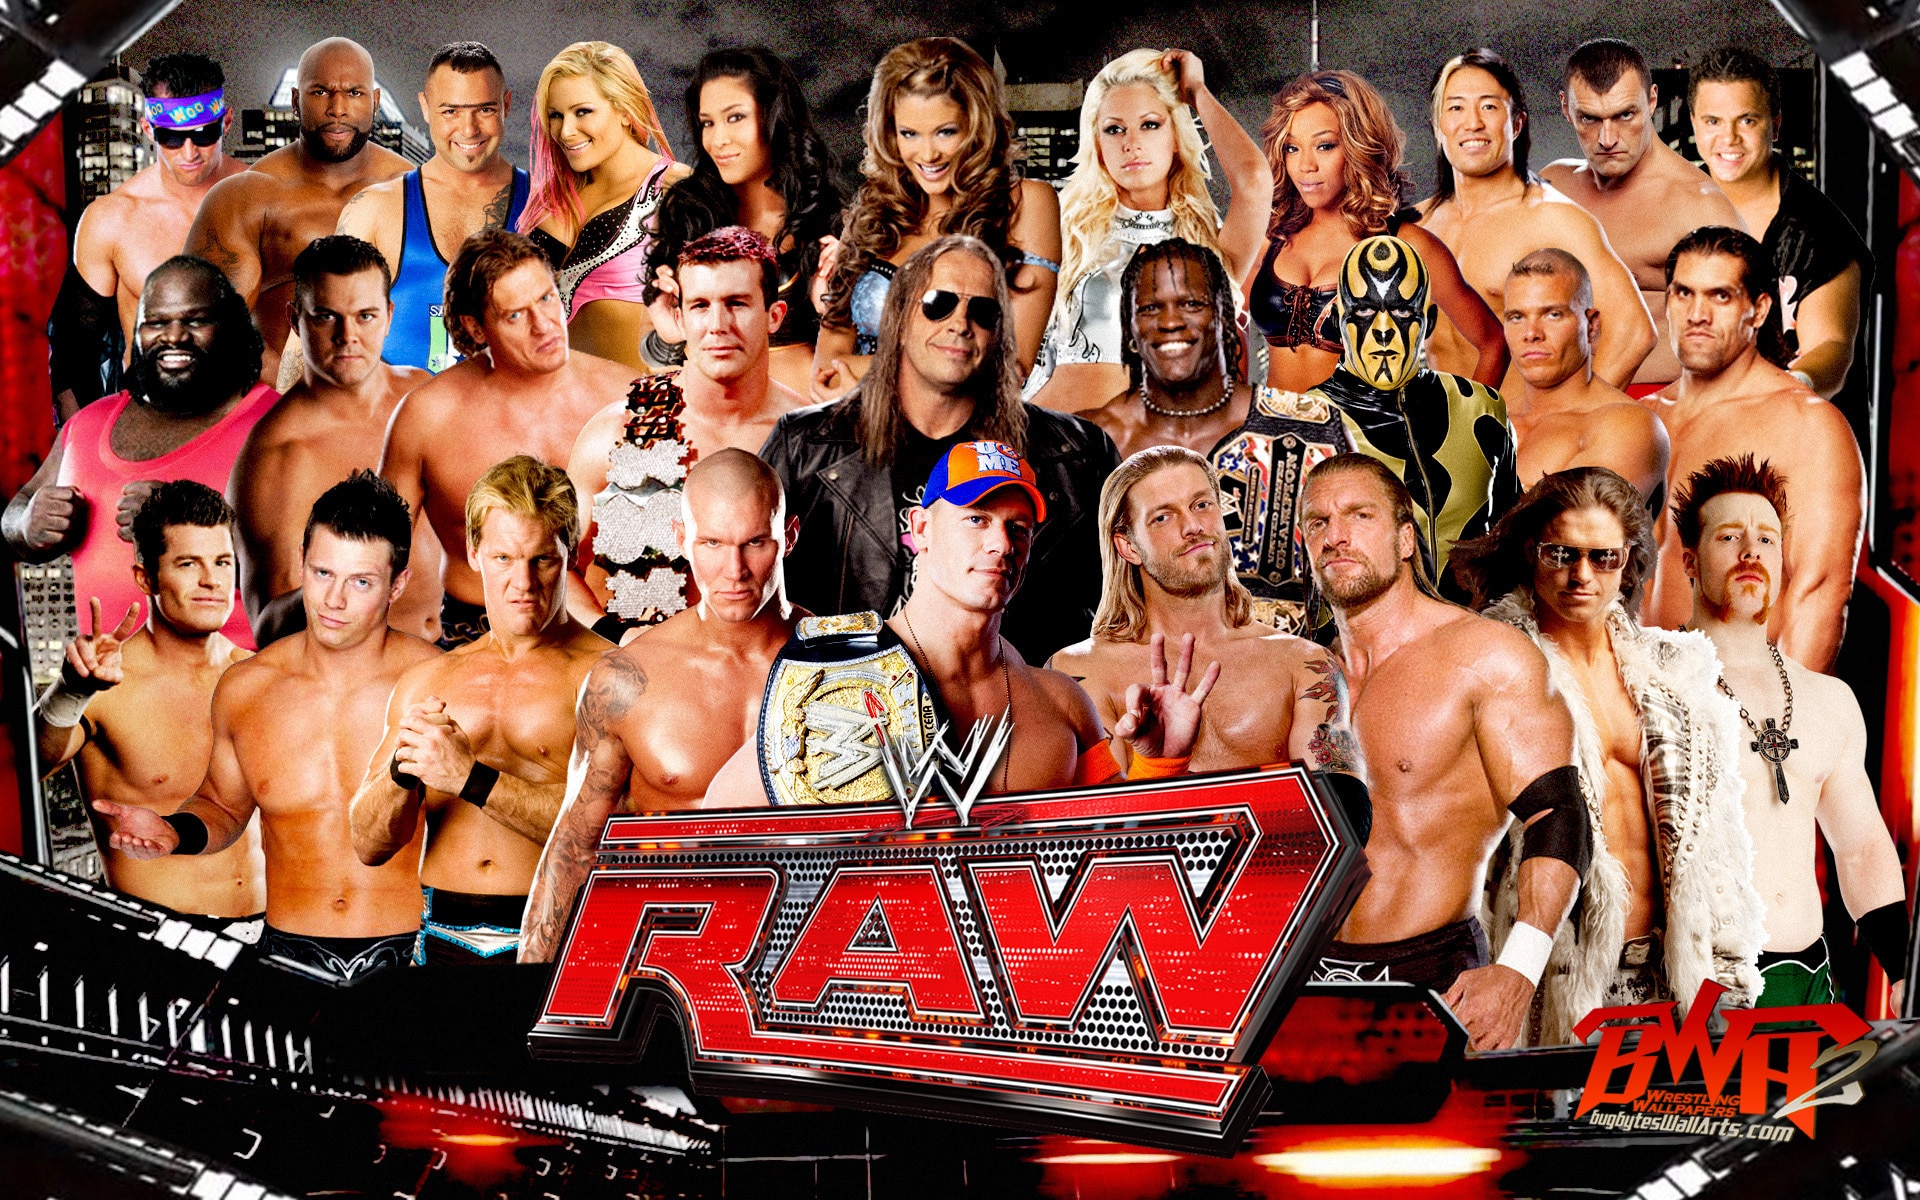 ahead-of-wwe-india-showdown-here-are-the-top-10-moments-of-raw-india